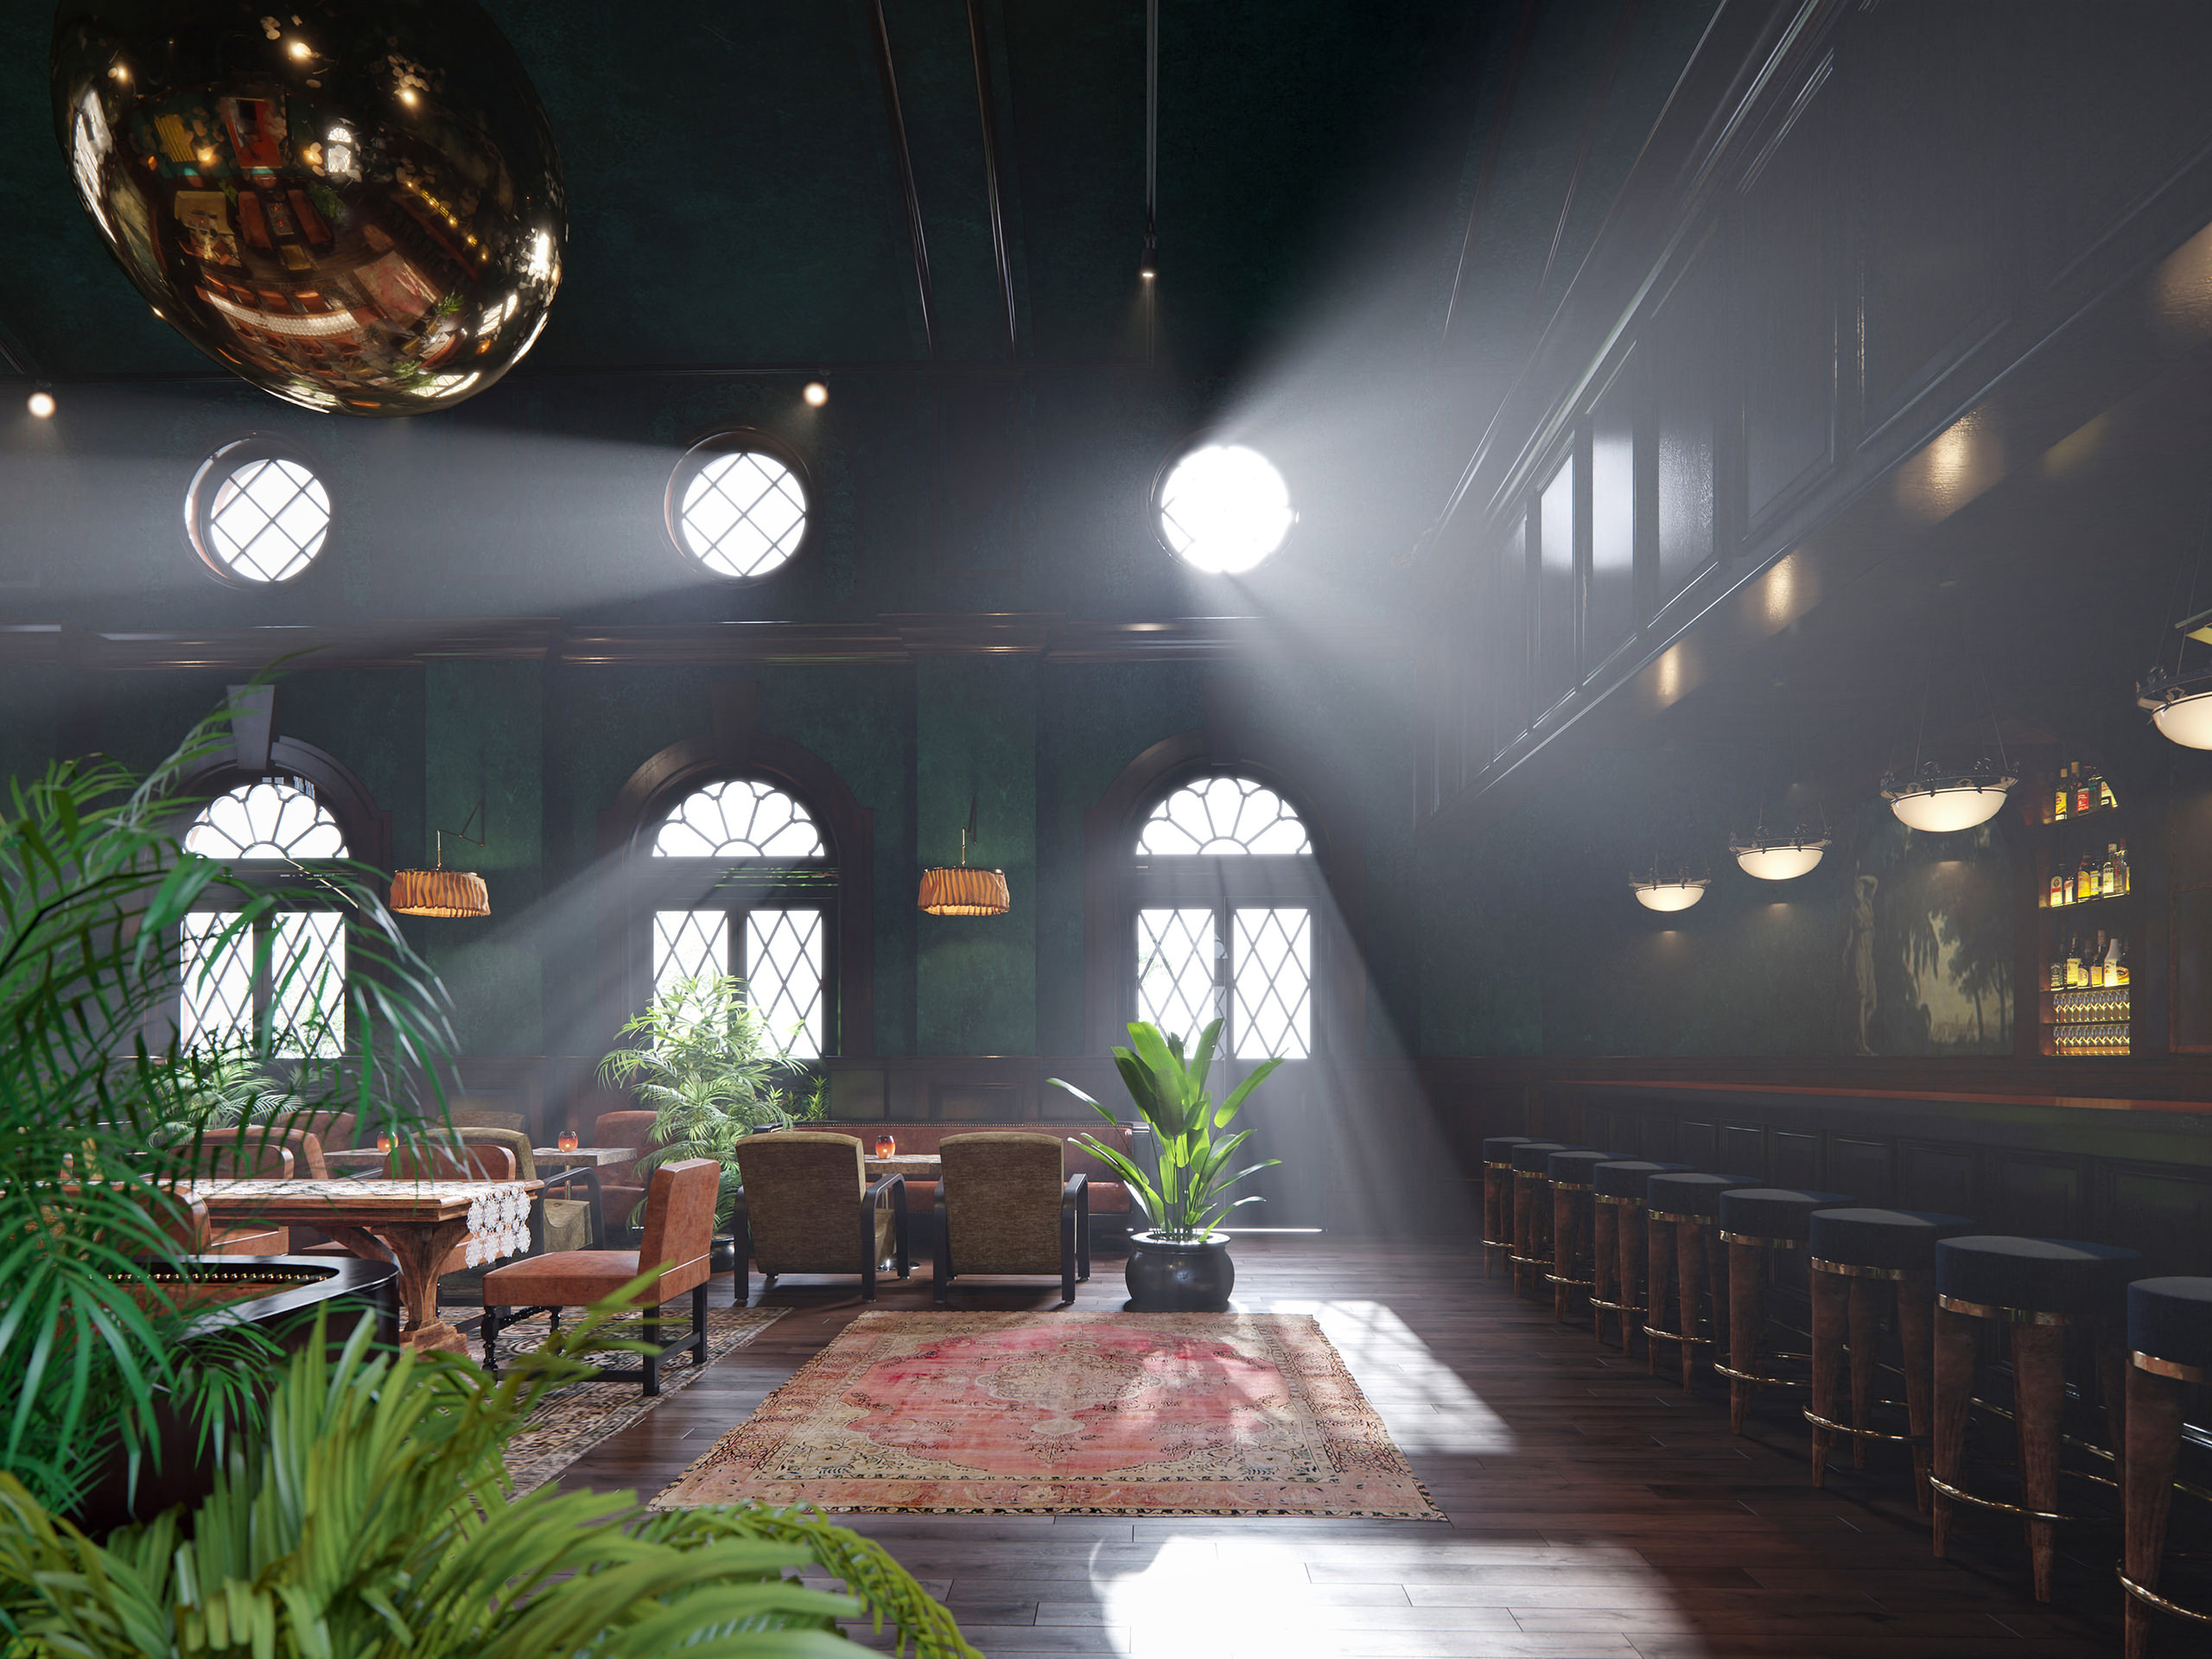 Render of the magistracy courtroom lounge captured from the entrance door looking out directly across on the big arched windows and small submarine-like ones above overflowing the space with light